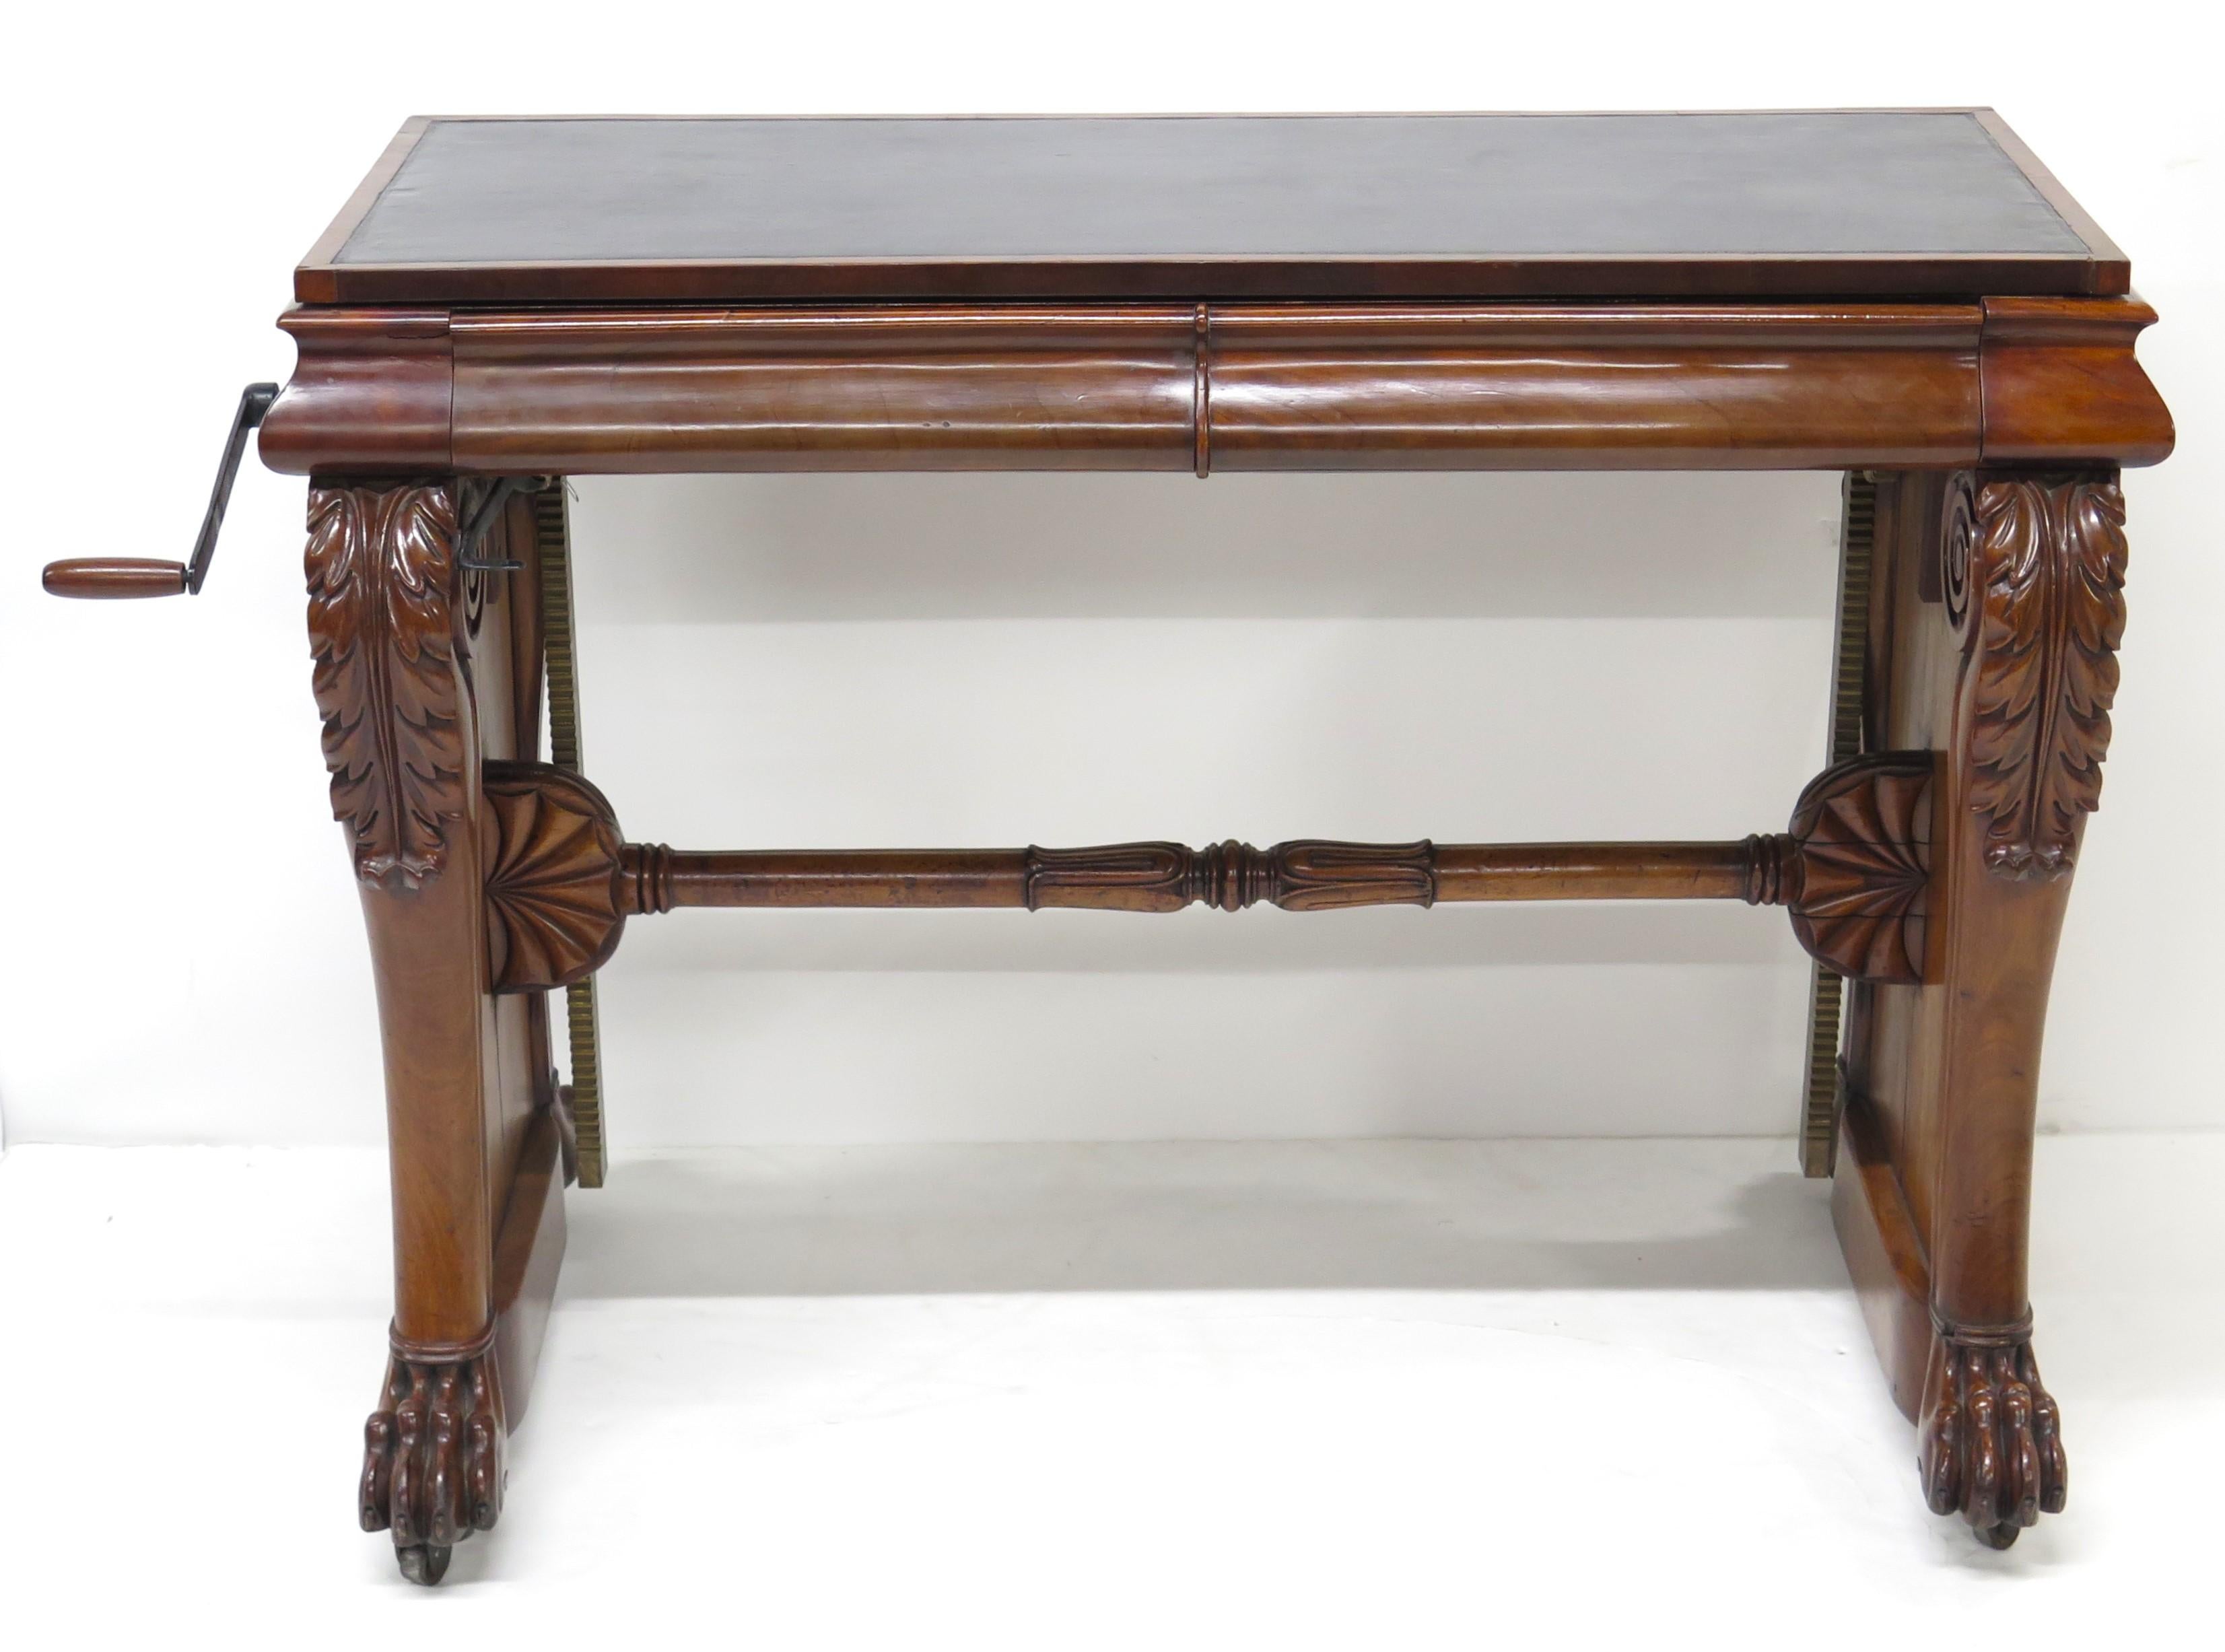 William IV Mahogany Stretcher Based Library Table with Black Leather Top For Sale 13